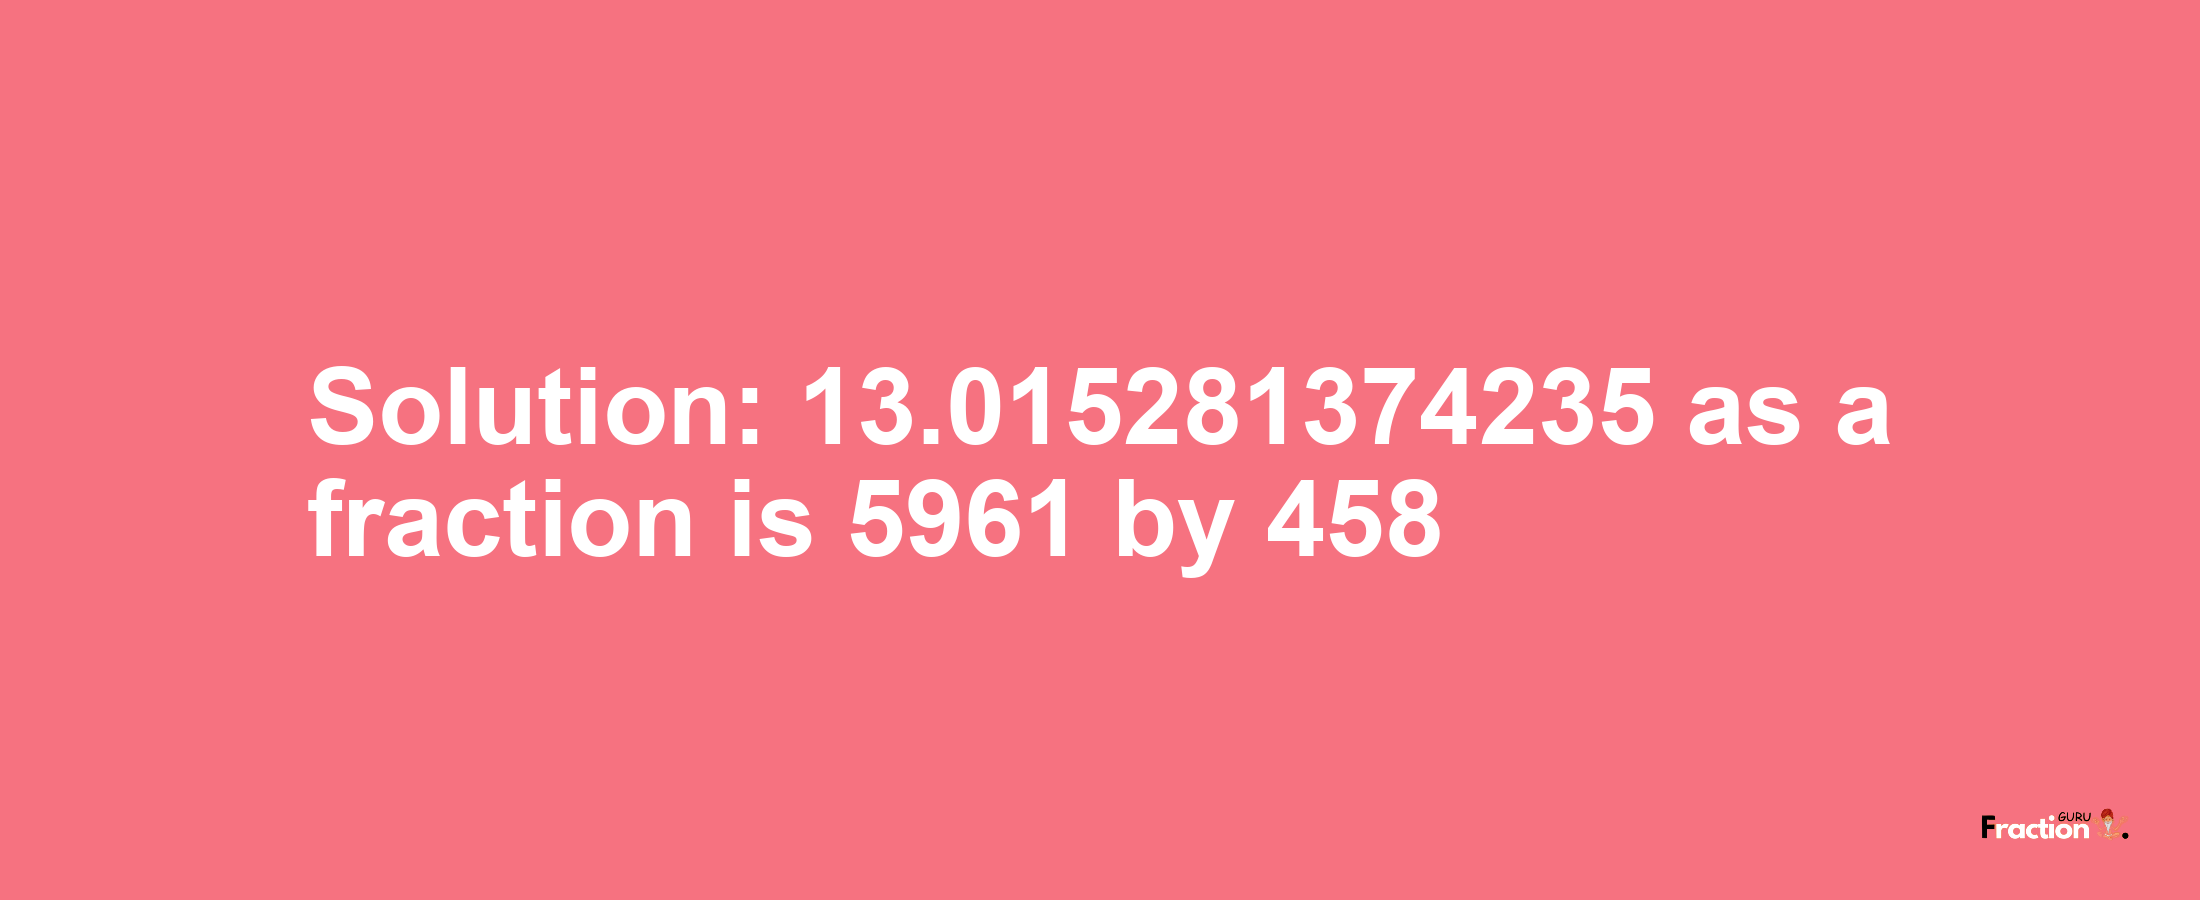 Solution:13.015281374235 as a fraction is 5961/458